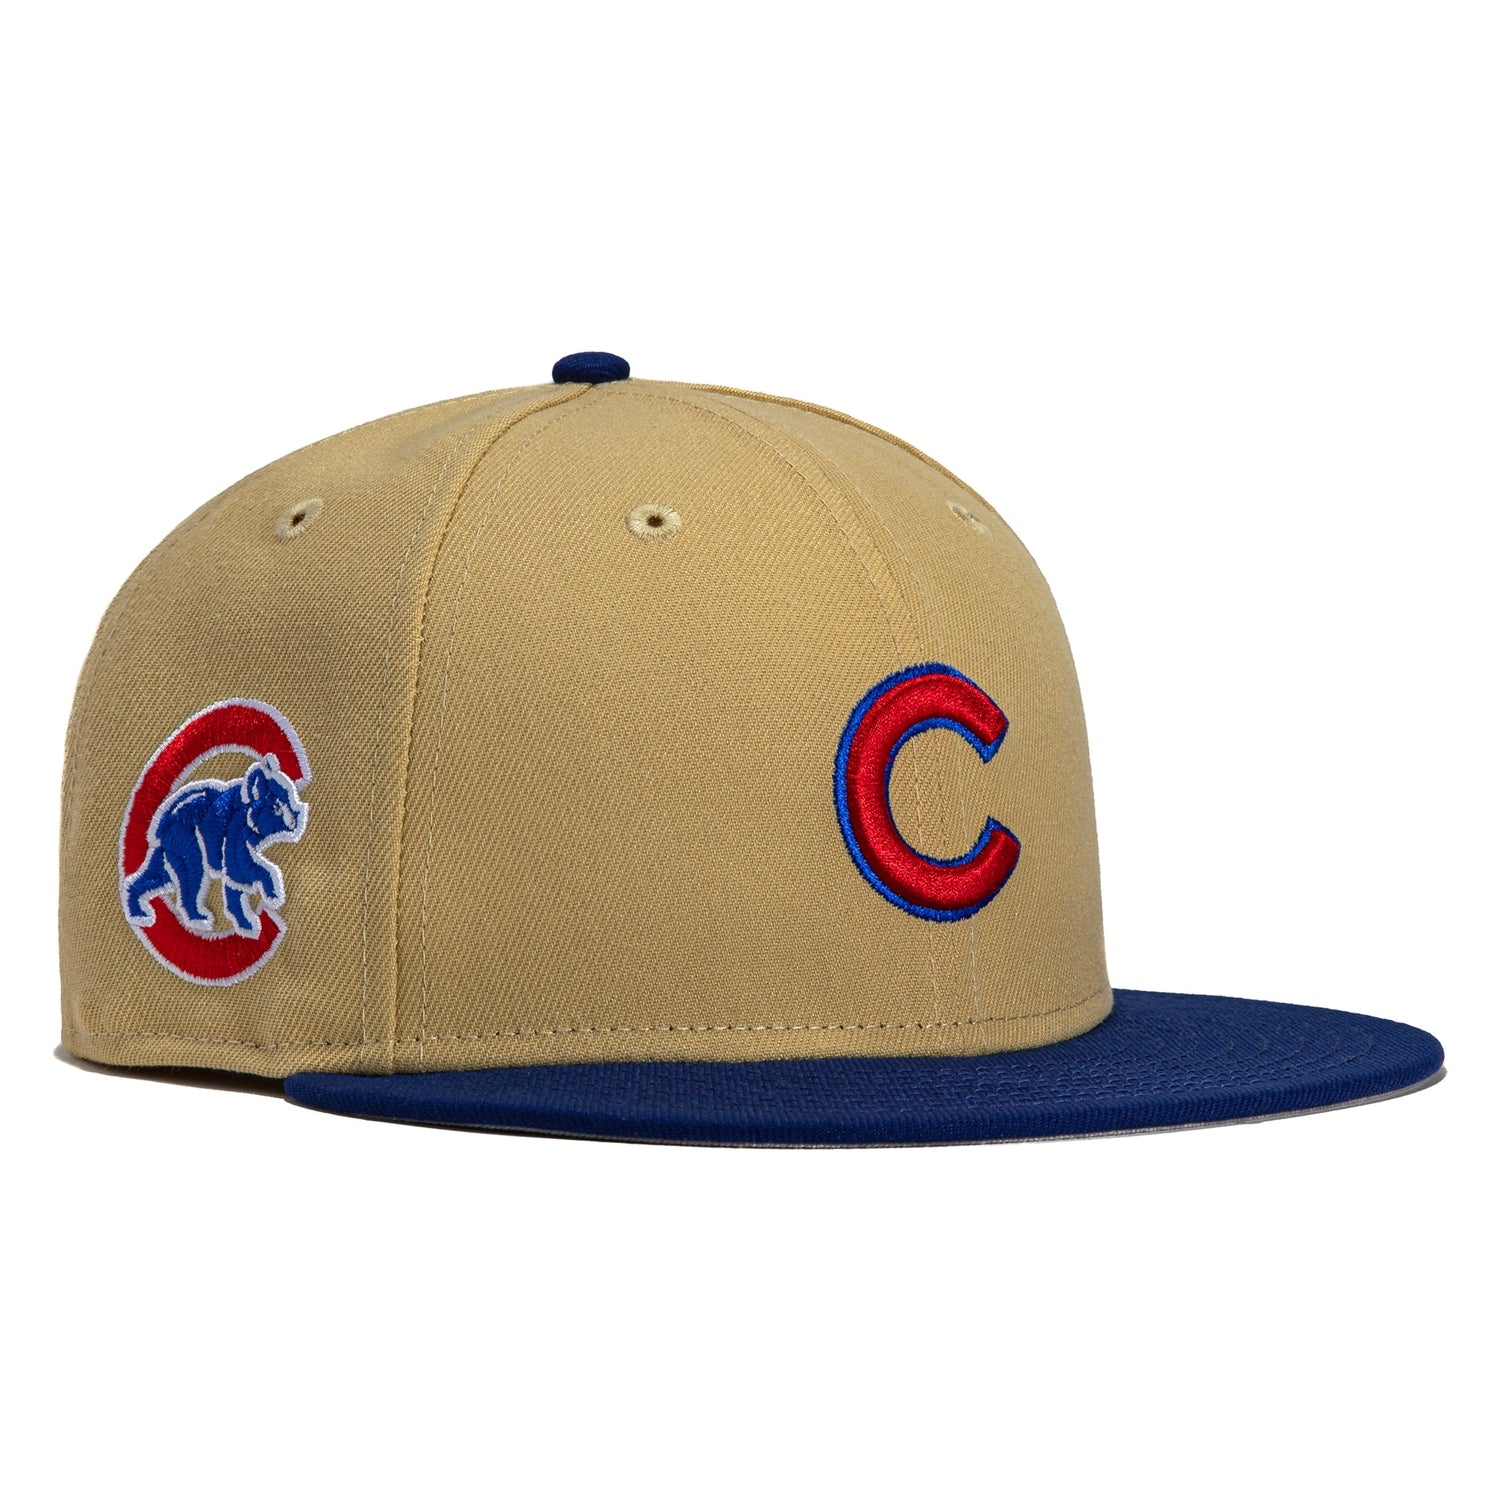 New Era 59FIFTY Toothpick Pack Chicago Cubs Logo Patch Alternate Hat - Tan, Royal Tan/Royal / 7 5/8